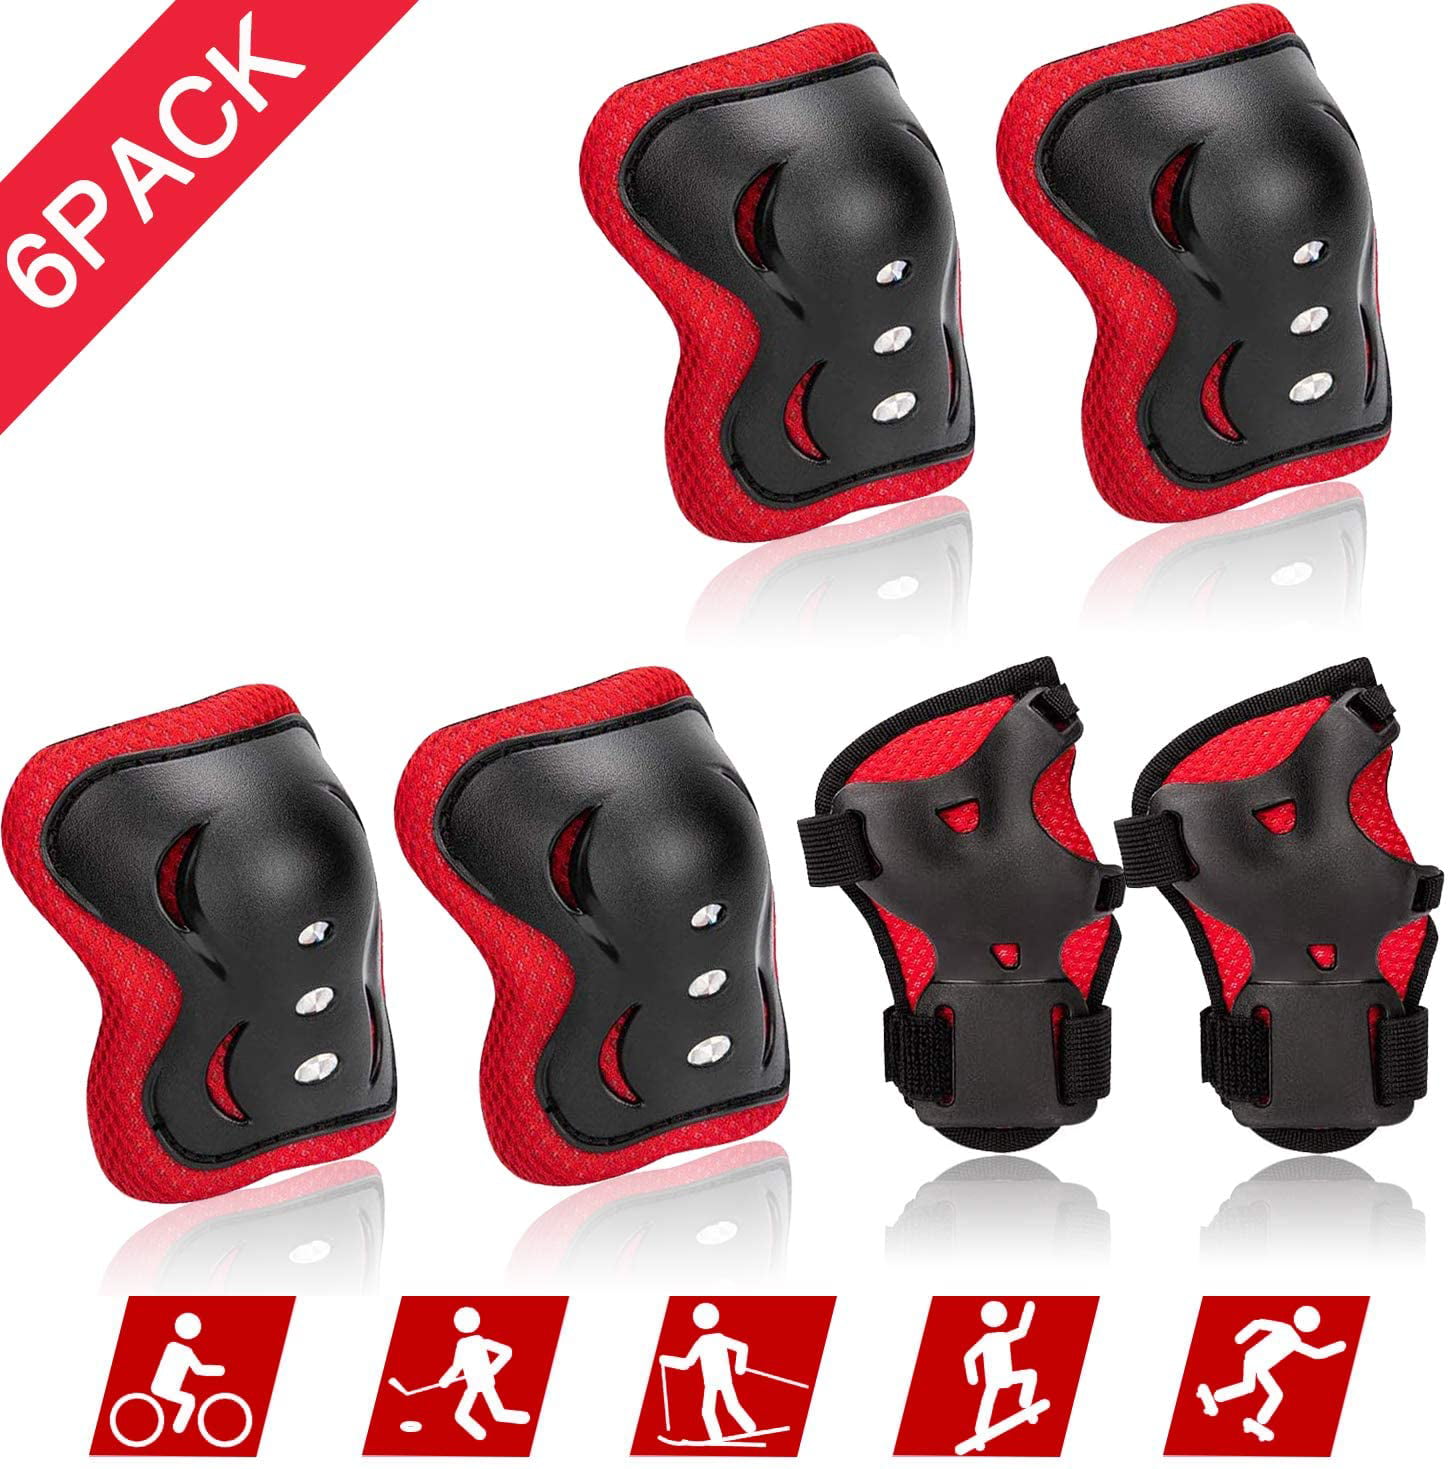 Football Volleyball Wrist Guards Toddler for Multi-sports Outdoor Activities Kids/Youth Knee Pad Elbow Pads Guards Protective Gear Set for Roller Skates Cycling BMX Bike Skateboard Inline Skatings Scooter Riding Sports Skating 